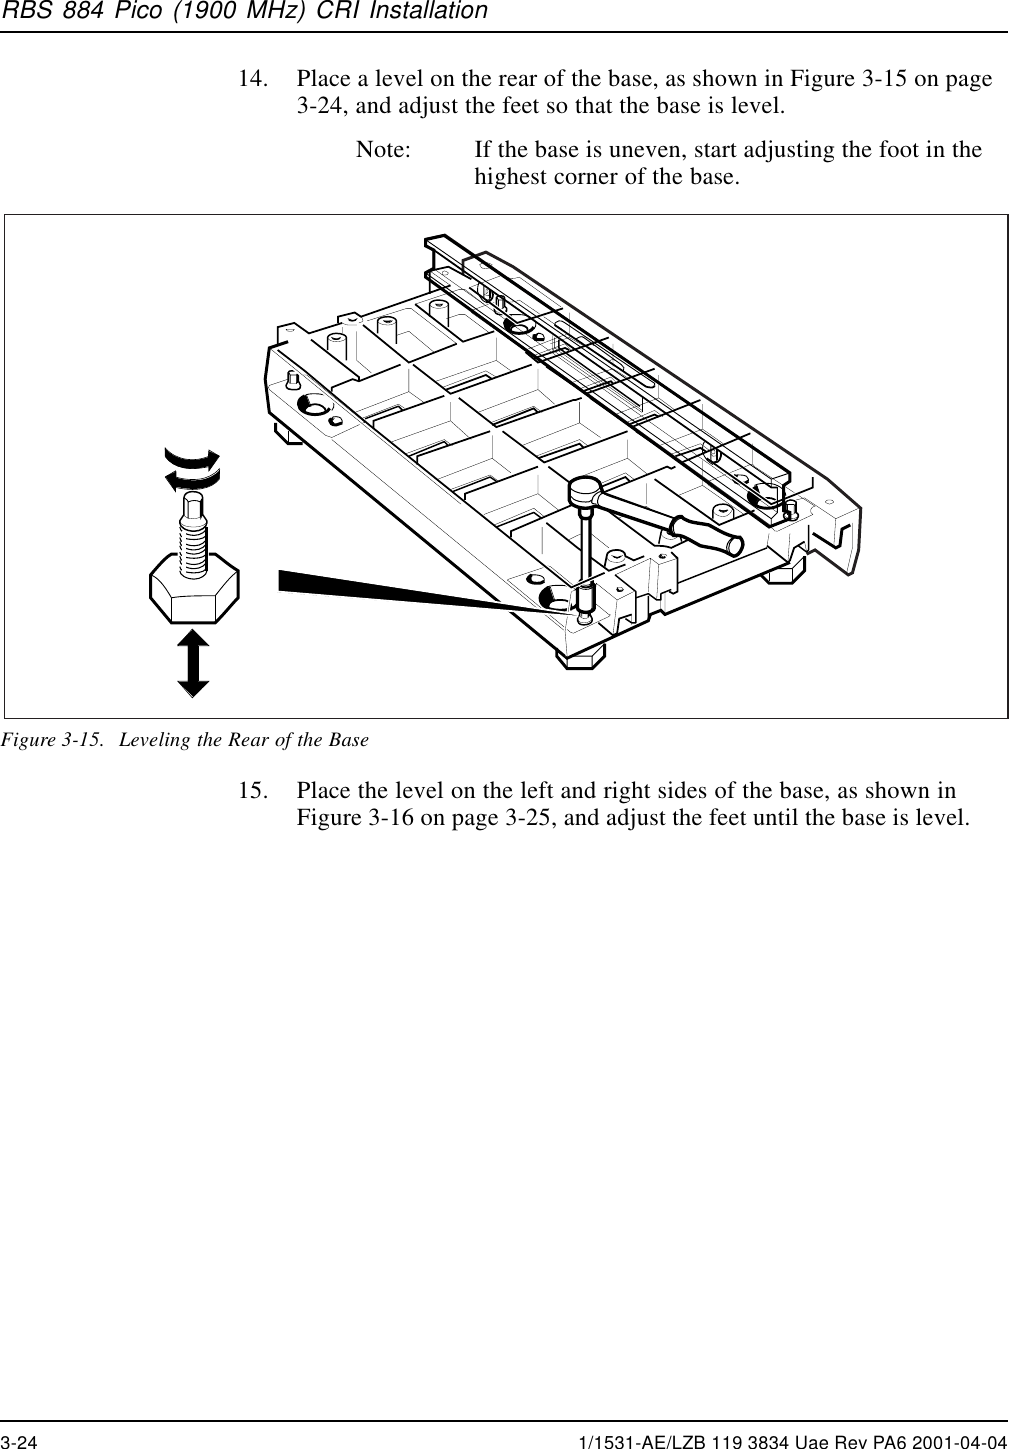 RBS 884 Pico (1900 MHz) CRI Installation14. Place a level on the rear of the base, as shown in Figure 3-15 on page3-24, and adjust the feet so that the base is level.Note: If the base is uneven, start adjusting the foot in thehighest corner of the base.Figure 3-15. Leveling the Rear of the Base15. Place the level on the left and right sides of the base, as shown inFigure 3-16 on page 3-25, and adjust the feet until the base is level.3-24 1/1531-AE/LZB 119 3834 Uae Rev PA6 2001-04-04